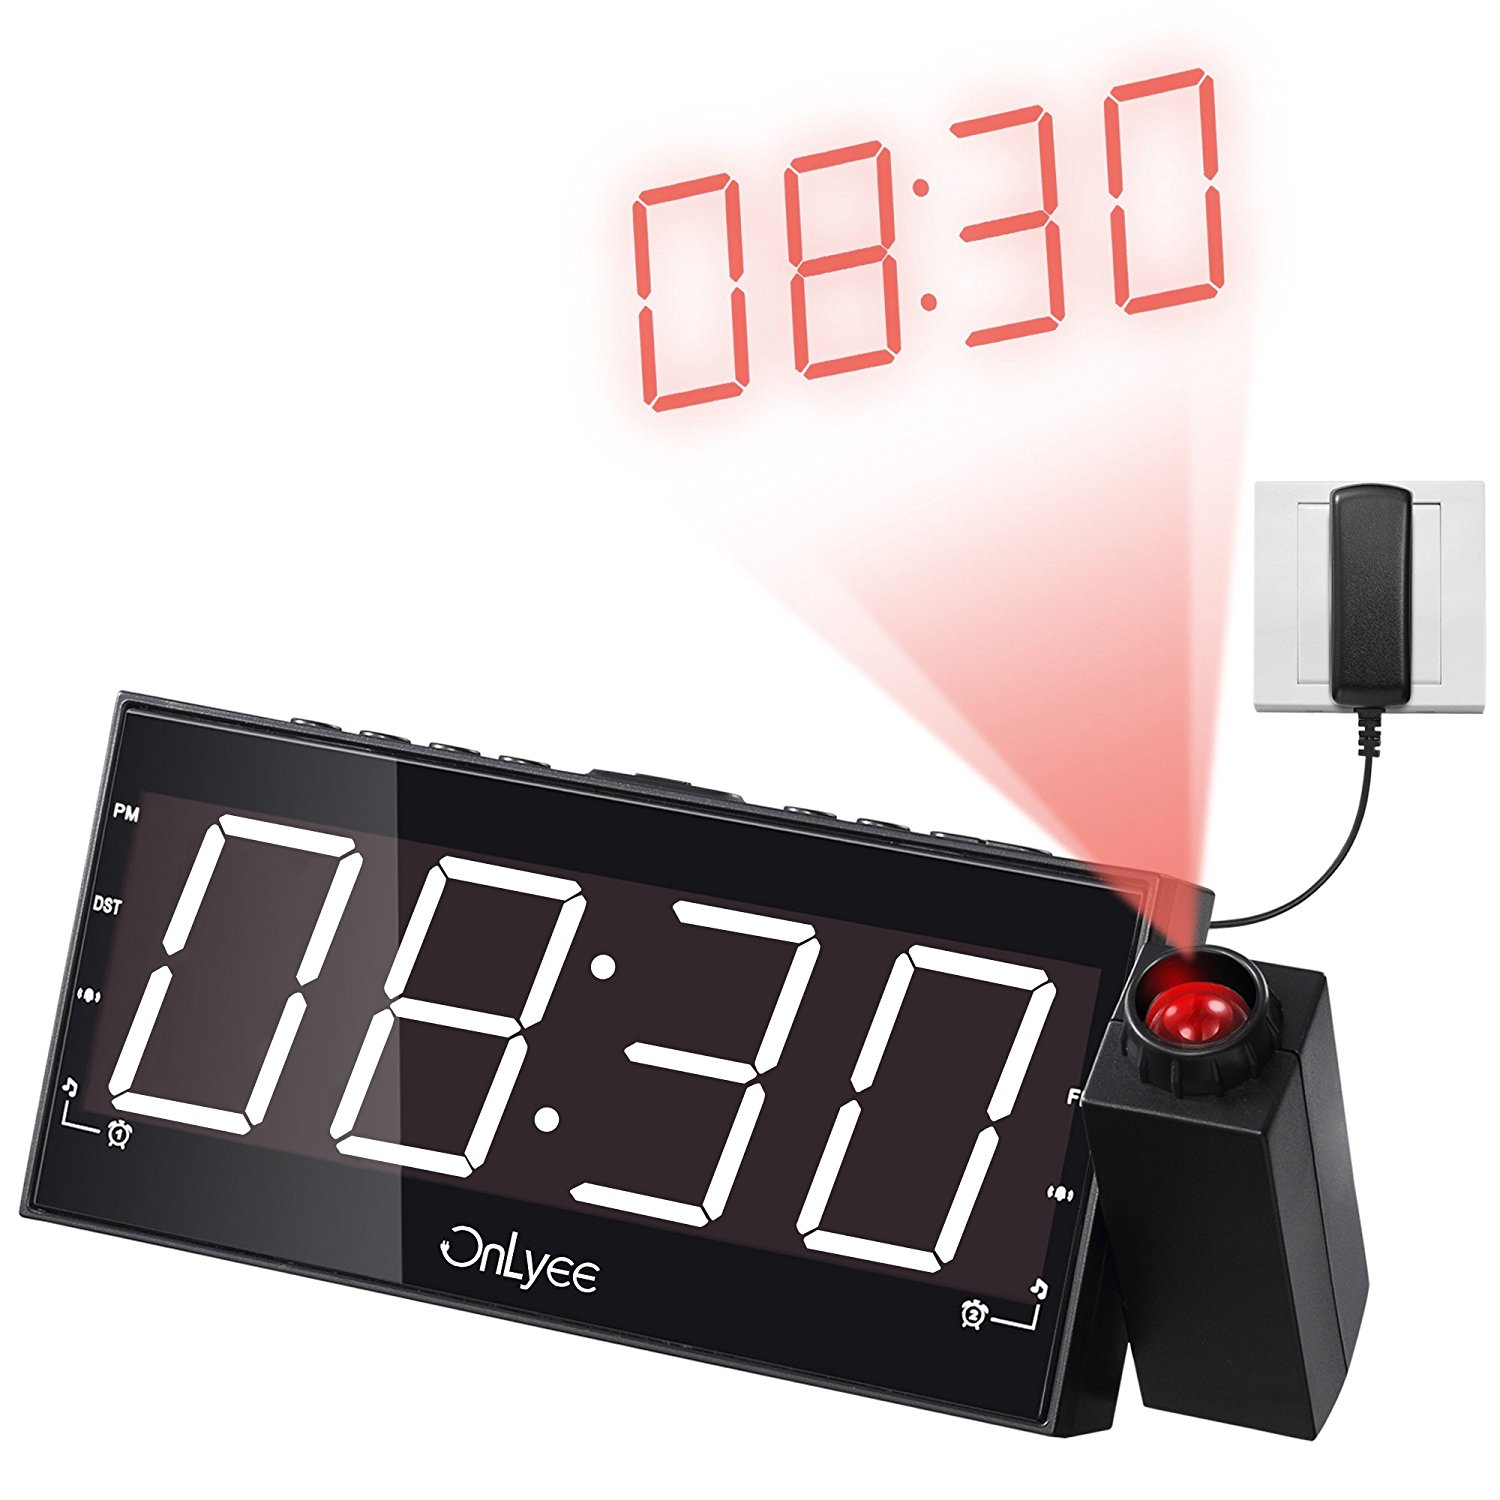 OnLyee Digital LED Dimmable Projection Alarm Clock Radio with AM/FM,USB Charging Port (WHITE)